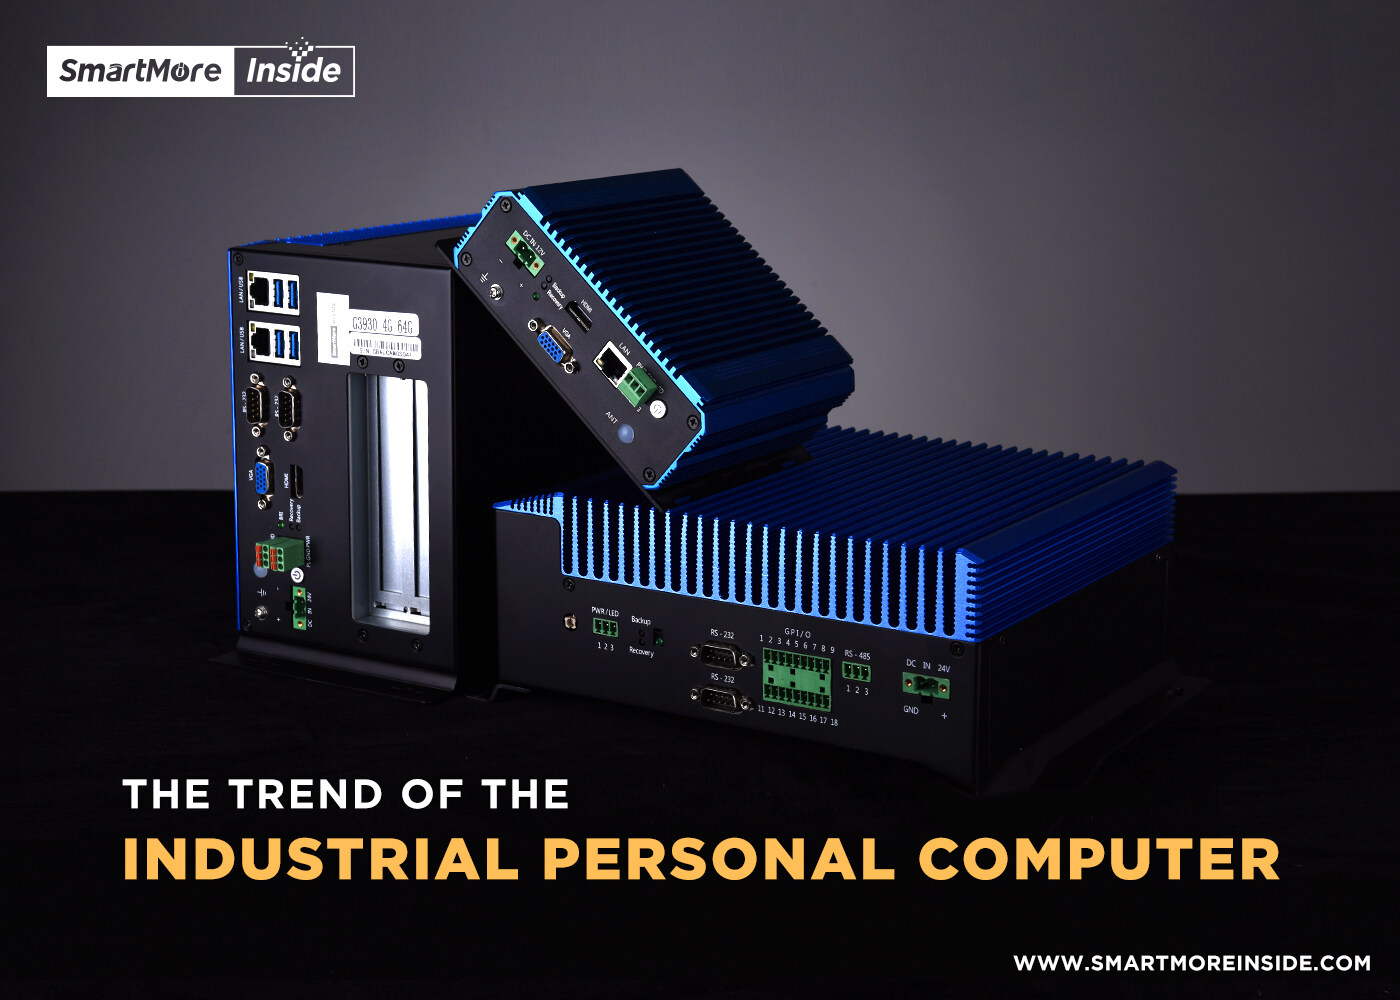 The trend of Industrial Personal Computers